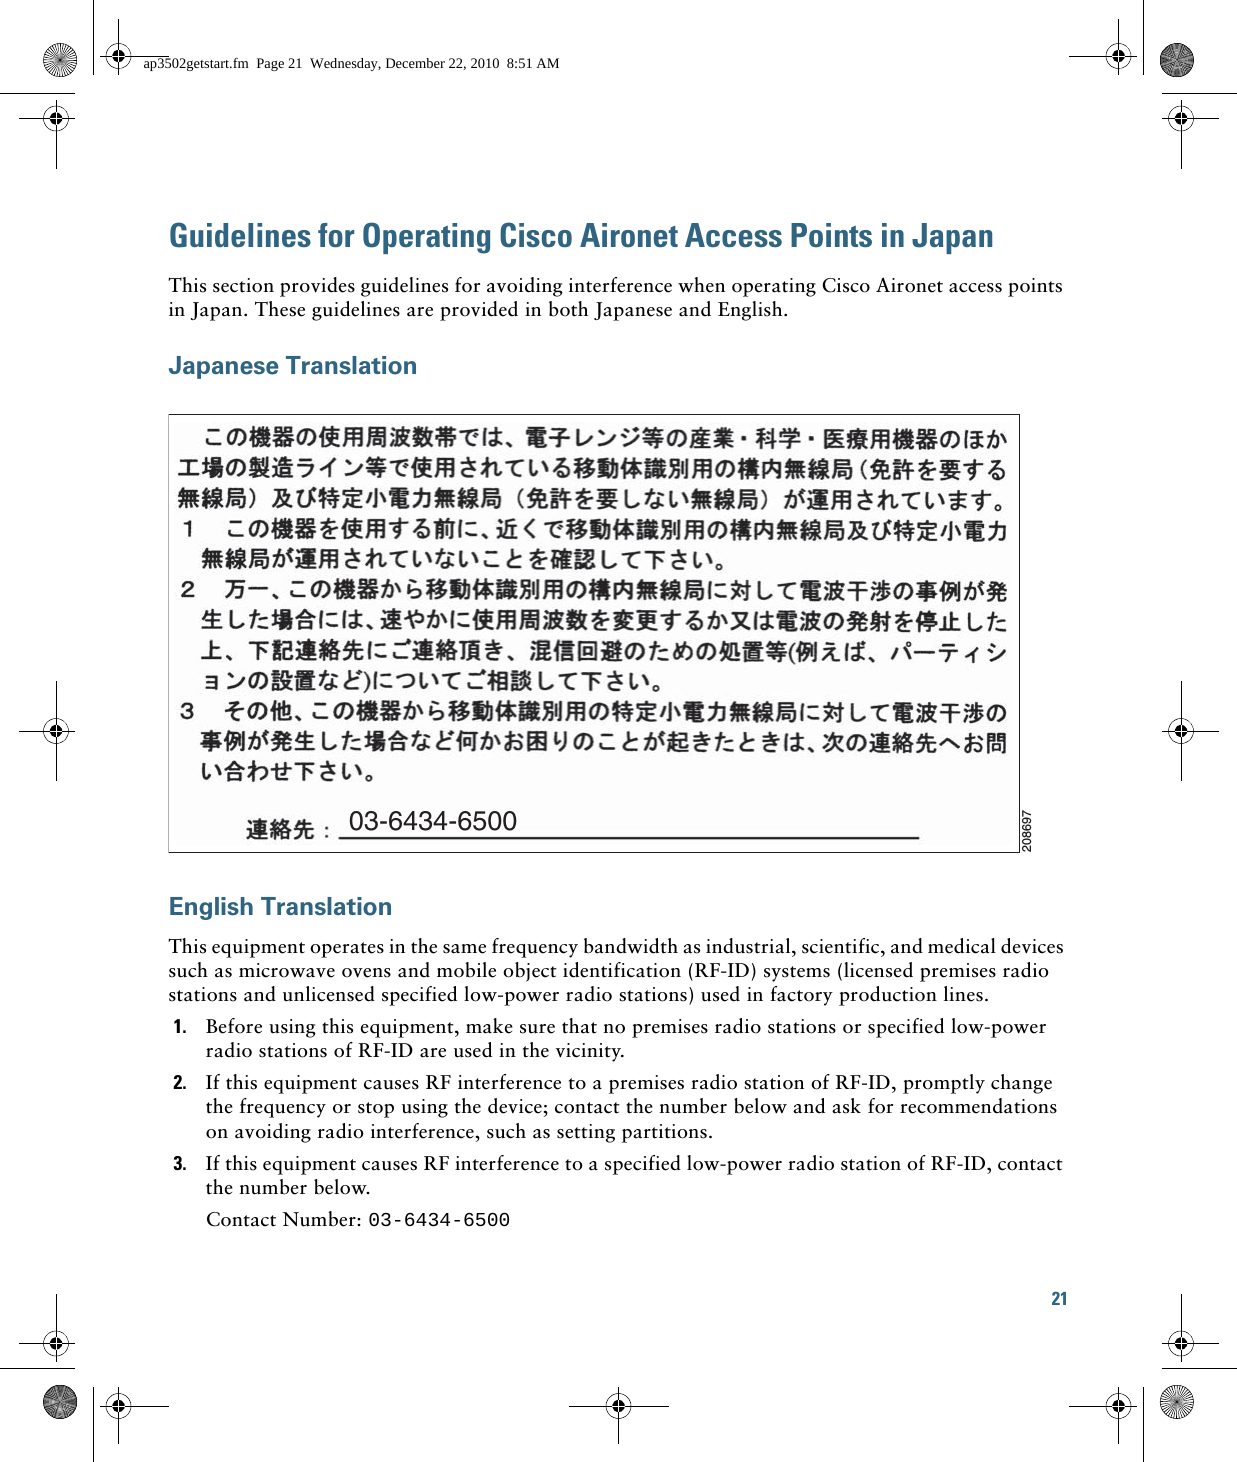 21 Guidelines for Operating Cisco Aironet Access Points in JapanThis section provides guidelines for avoiding interference when operating Cisco Aironet access points in Japan. These guidelines are provided in both Japanese and English.Japanese TranslationEnglish TranslationThis equipment operates in the same frequency bandwidth as industrial, scientific, and medical devices such as microwave ovens and mobile object identification (RF-ID) systems (licensed premises radio stations and unlicensed specified low-power radio stations) used in factory production lines.1. Before using this equipment, make sure that no premises radio stations or specified low-power radio stations of RF-ID are used in the vicinity.2. If this equipment causes RF interference to a premises radio station of RF-ID, promptly change the frequency or stop using the device; contact the number below and ask for recommendations on avoiding radio interference, such as setting partitions.3. If this equipment causes RF interference to a specified low-power radio station of RF-ID, contact the number below.Contact Number: 03-6434-650003-6434-6500208697ap3502getstart.fm  Page 21  Wednesday, December 22, 2010  8:51 AM